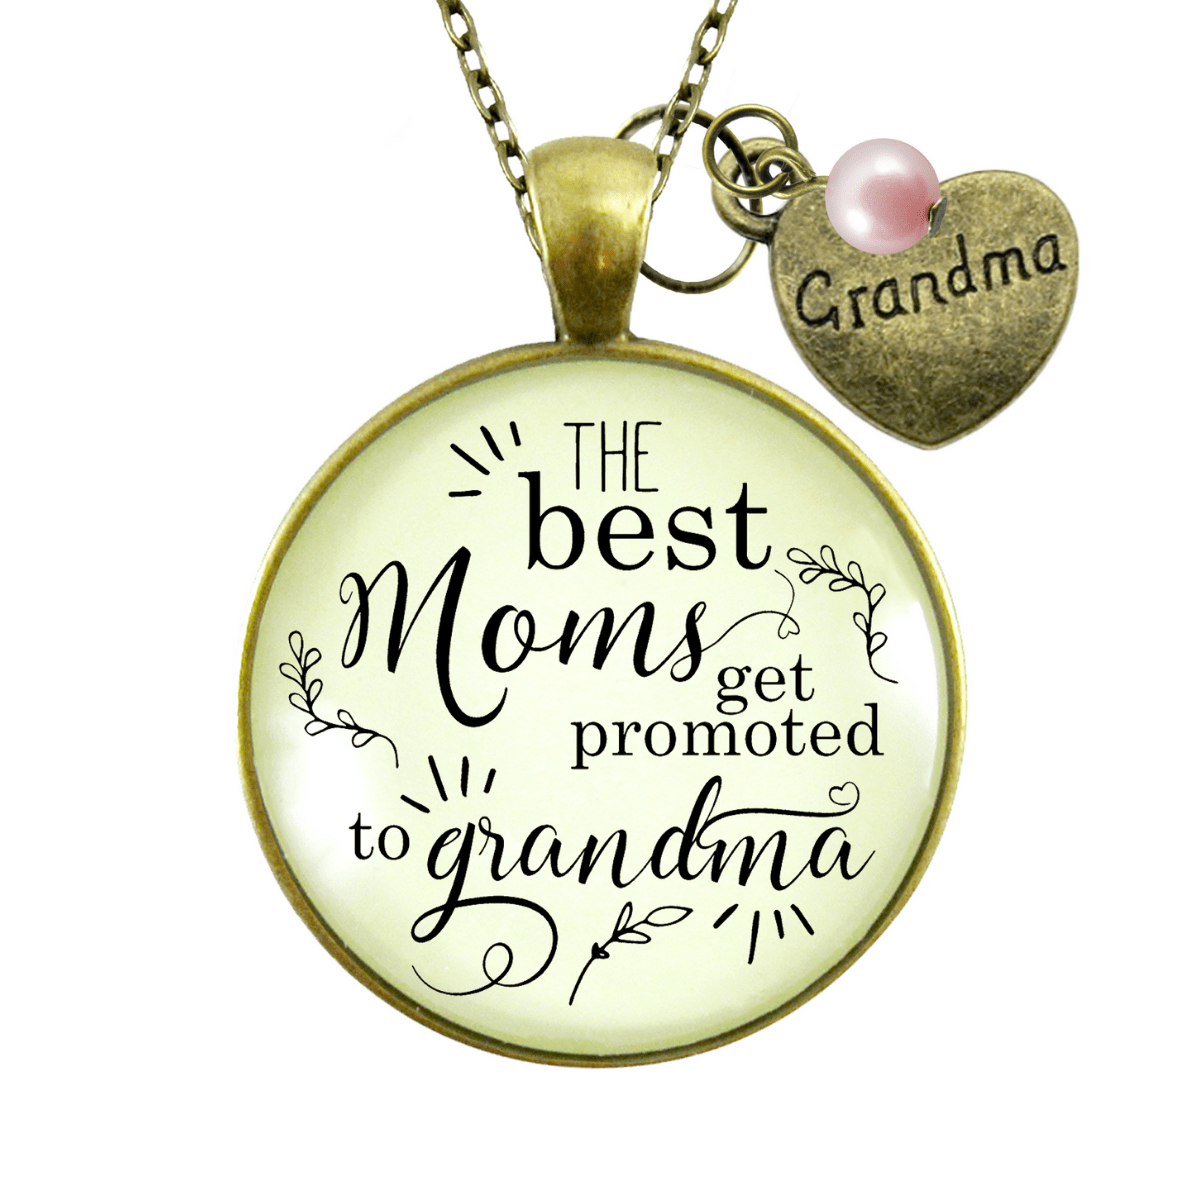 Gutsy Goodness Pregnancy Announcement Best Grandma Gender Reveal Necklace Gift Pink - Gutsy Goodness;Pregnancy Announcement Best Grandma Gender Reveal Necklace Gift Pink - Gutsy Goodness Handmade Jewelry Gifts